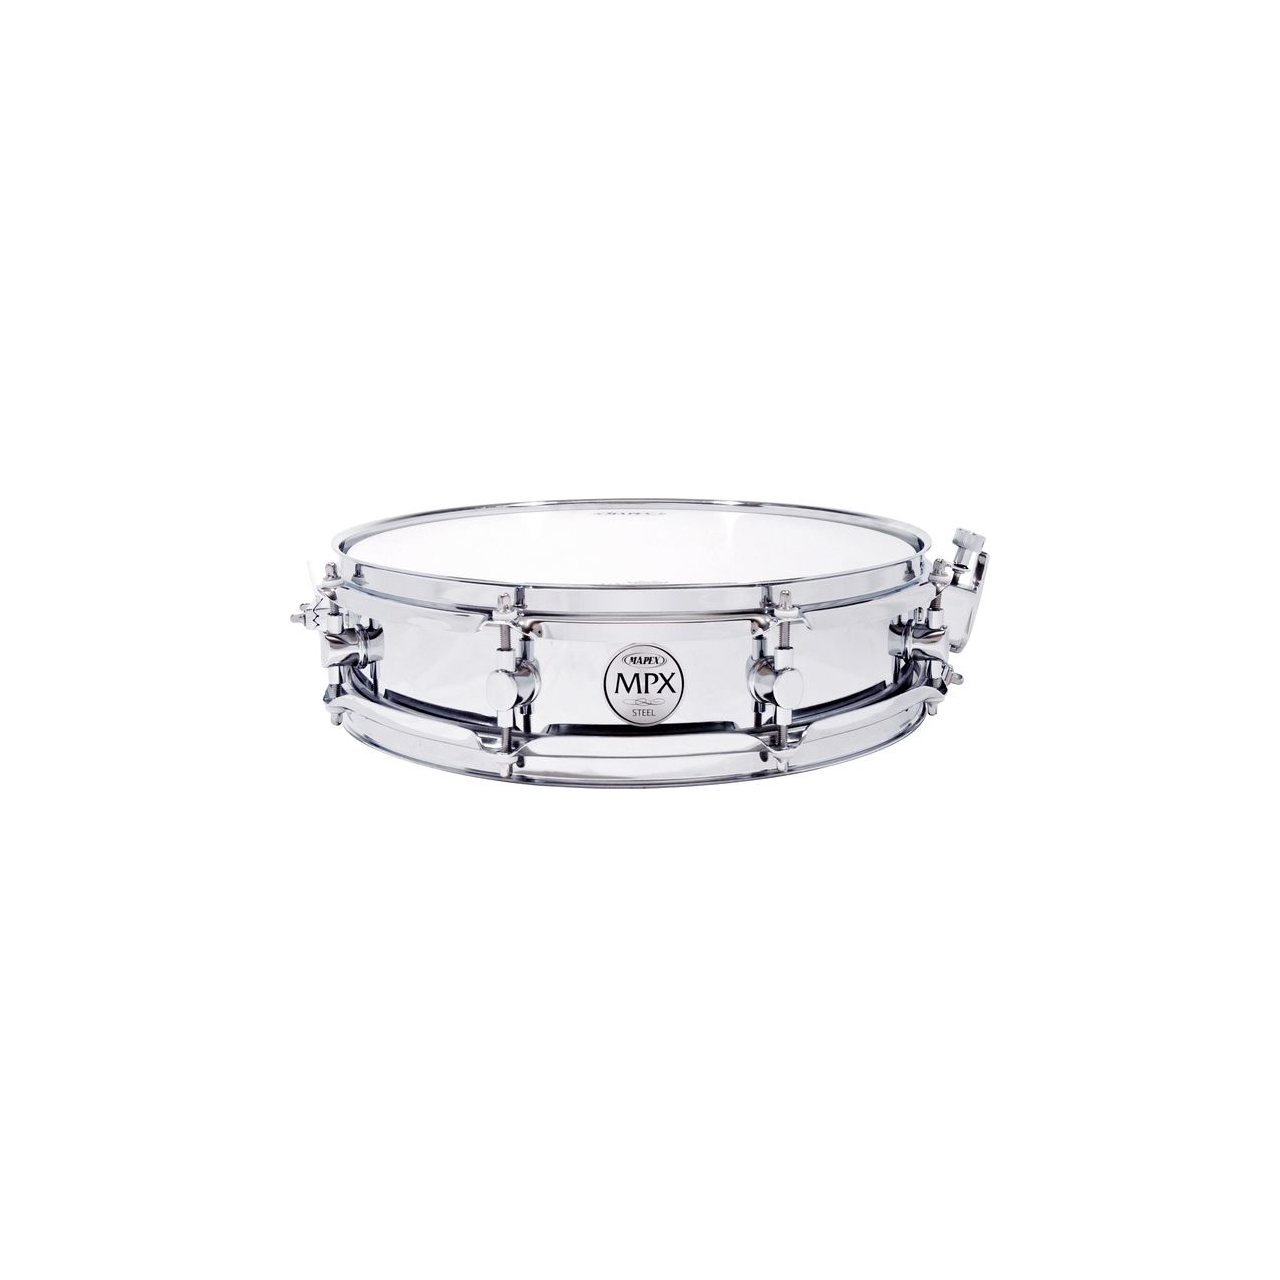 Mapex 13"x3,5"  MPX Snare Stahl, MPST3354